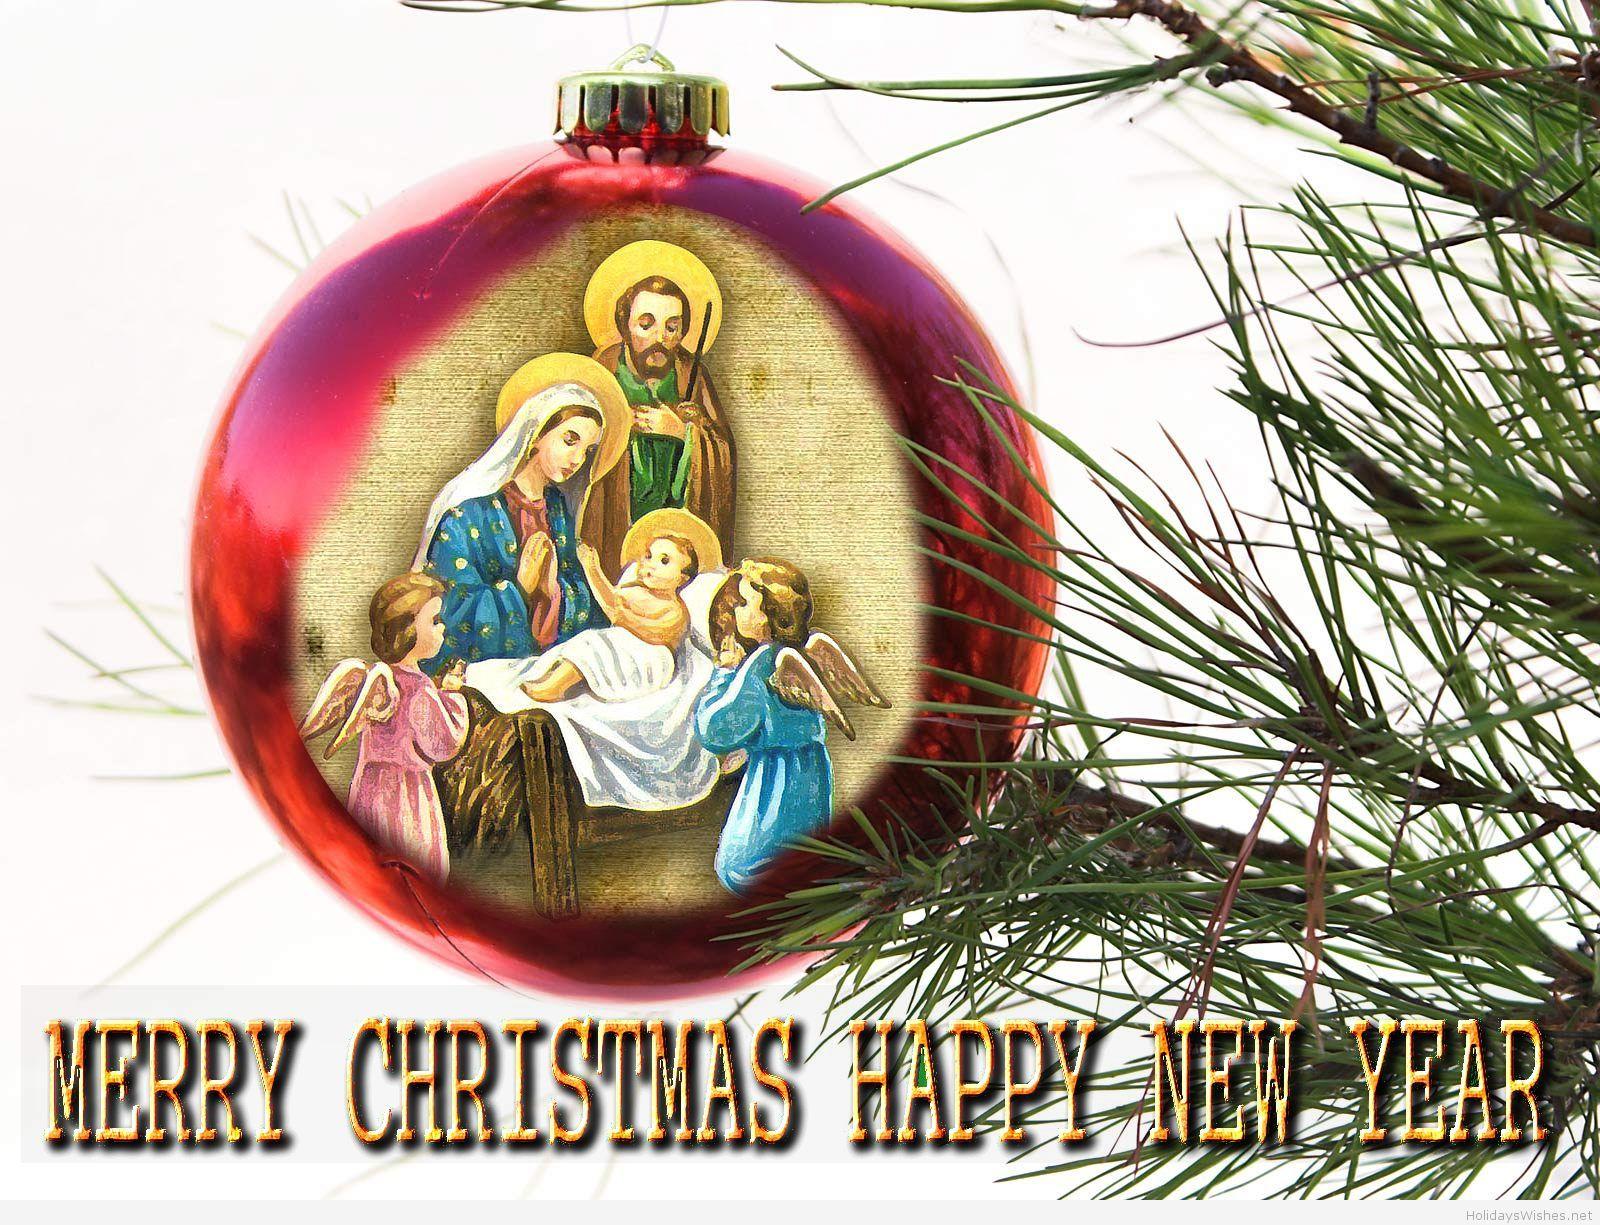 Merry Christmas Happy New Year Religious Wallpaper Merry Christmas And Happy New Year Wallpaper & Background Download